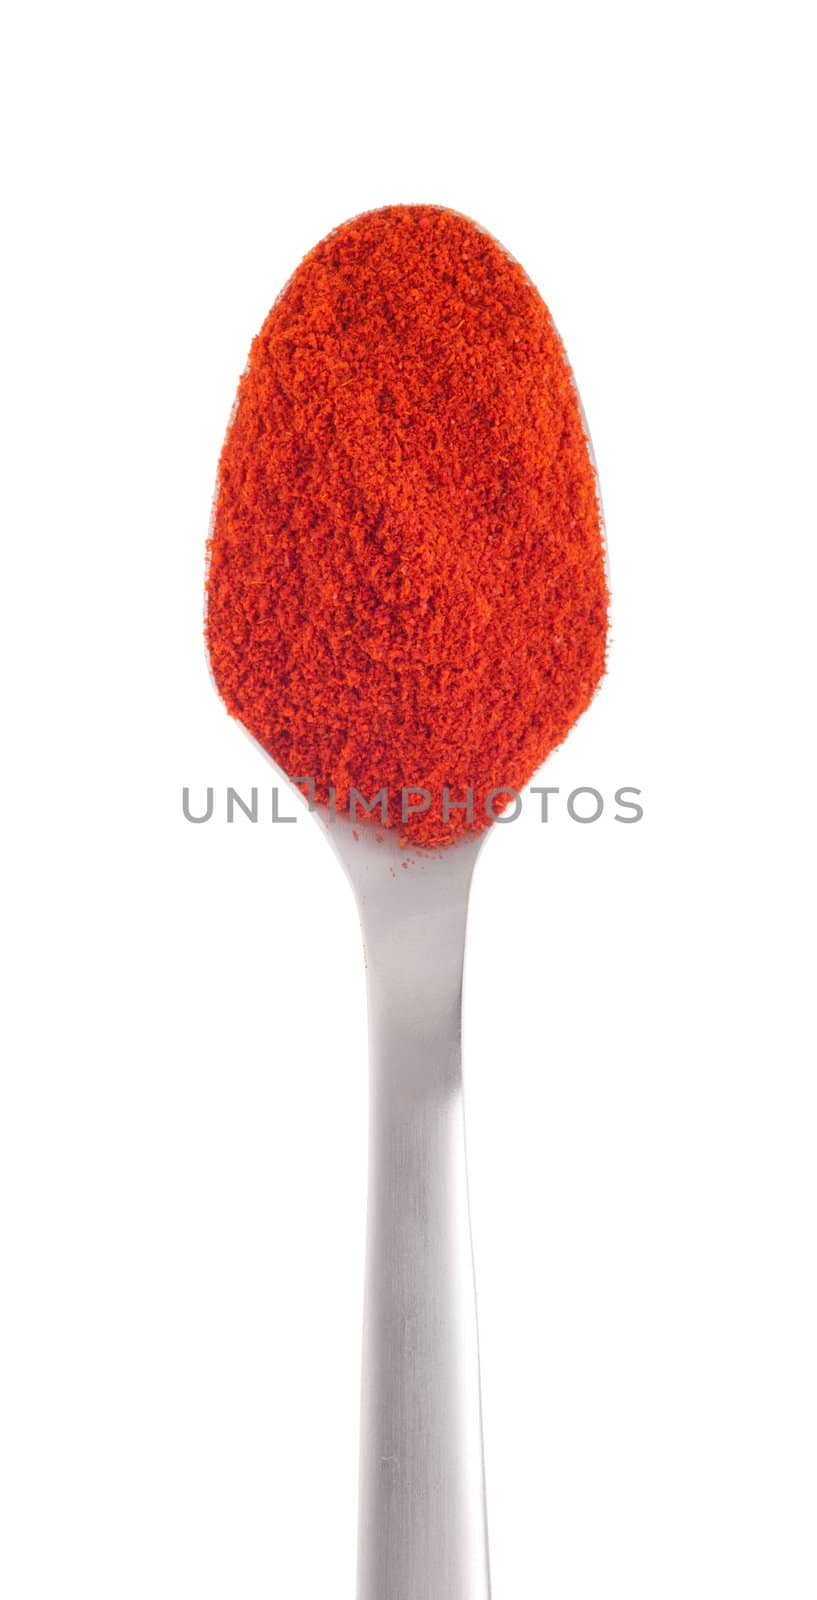 chili power spice on a stainless steel spoon, isolated on white background